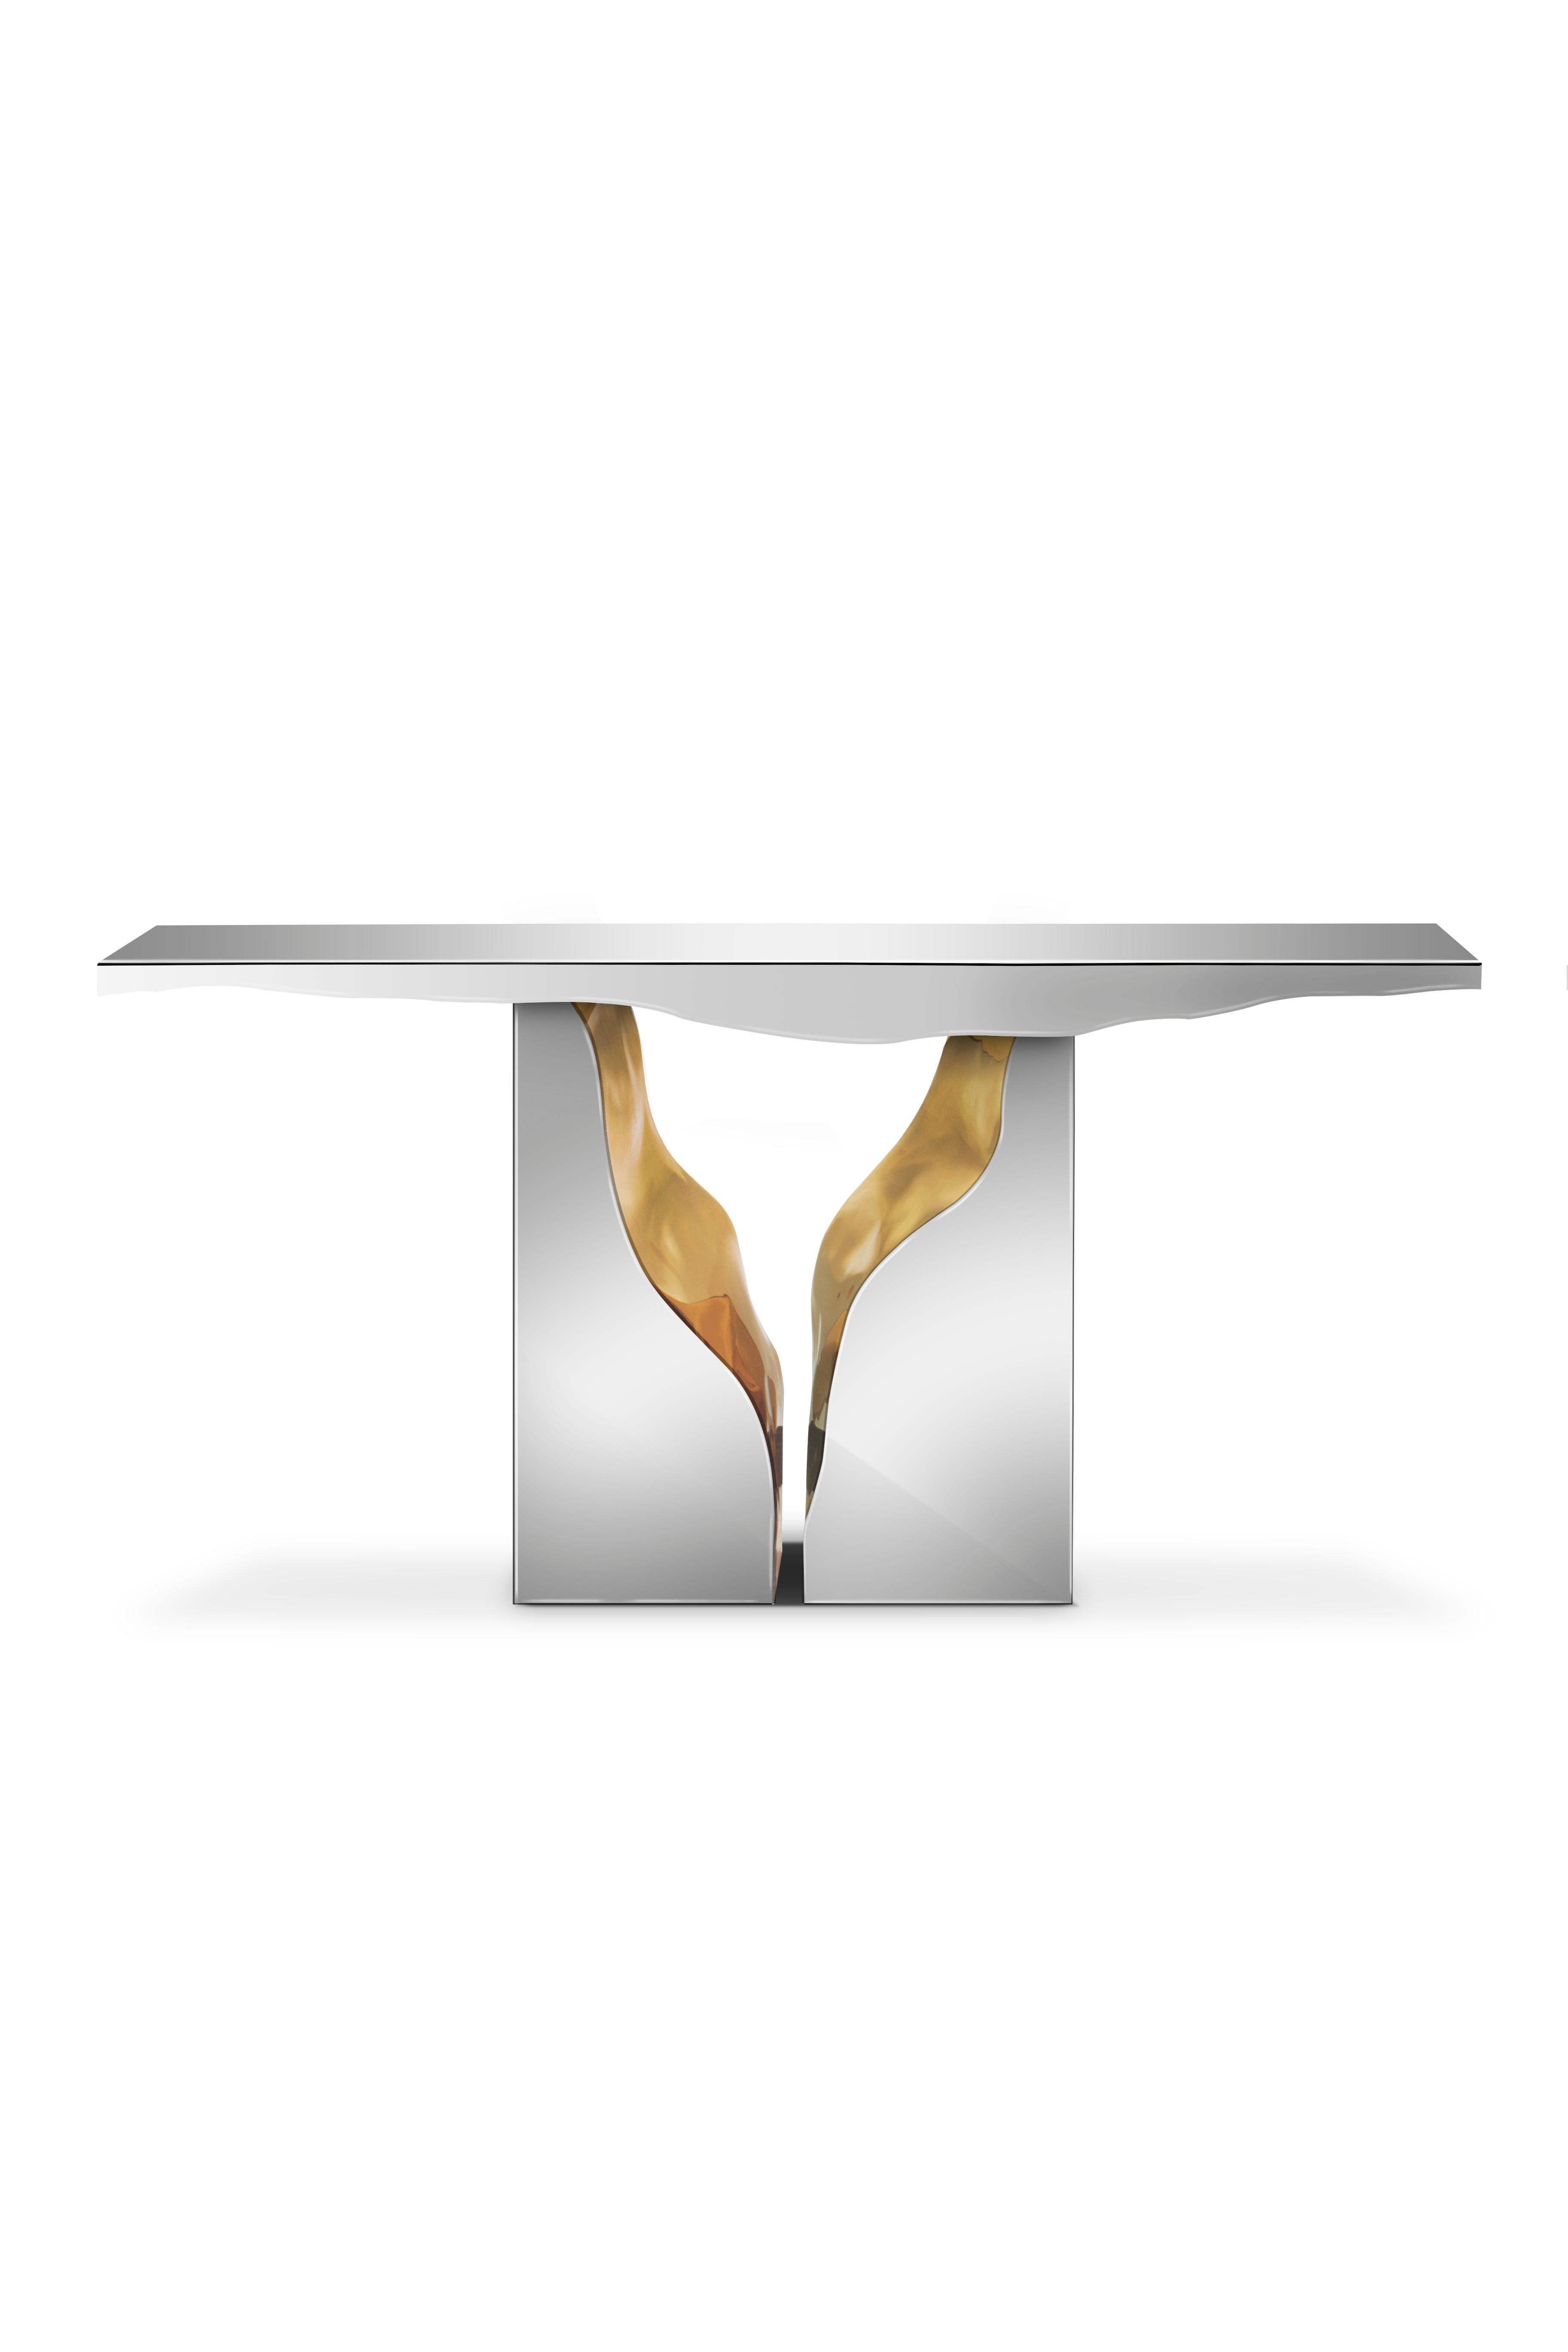 Lapiaz console takes exceptional craftsmanship and design to a new realm. Finding beauty in the most unexpected places, this contemporary design is inspired by authentic karst formations created by surface dissolution, freezing or thawing of